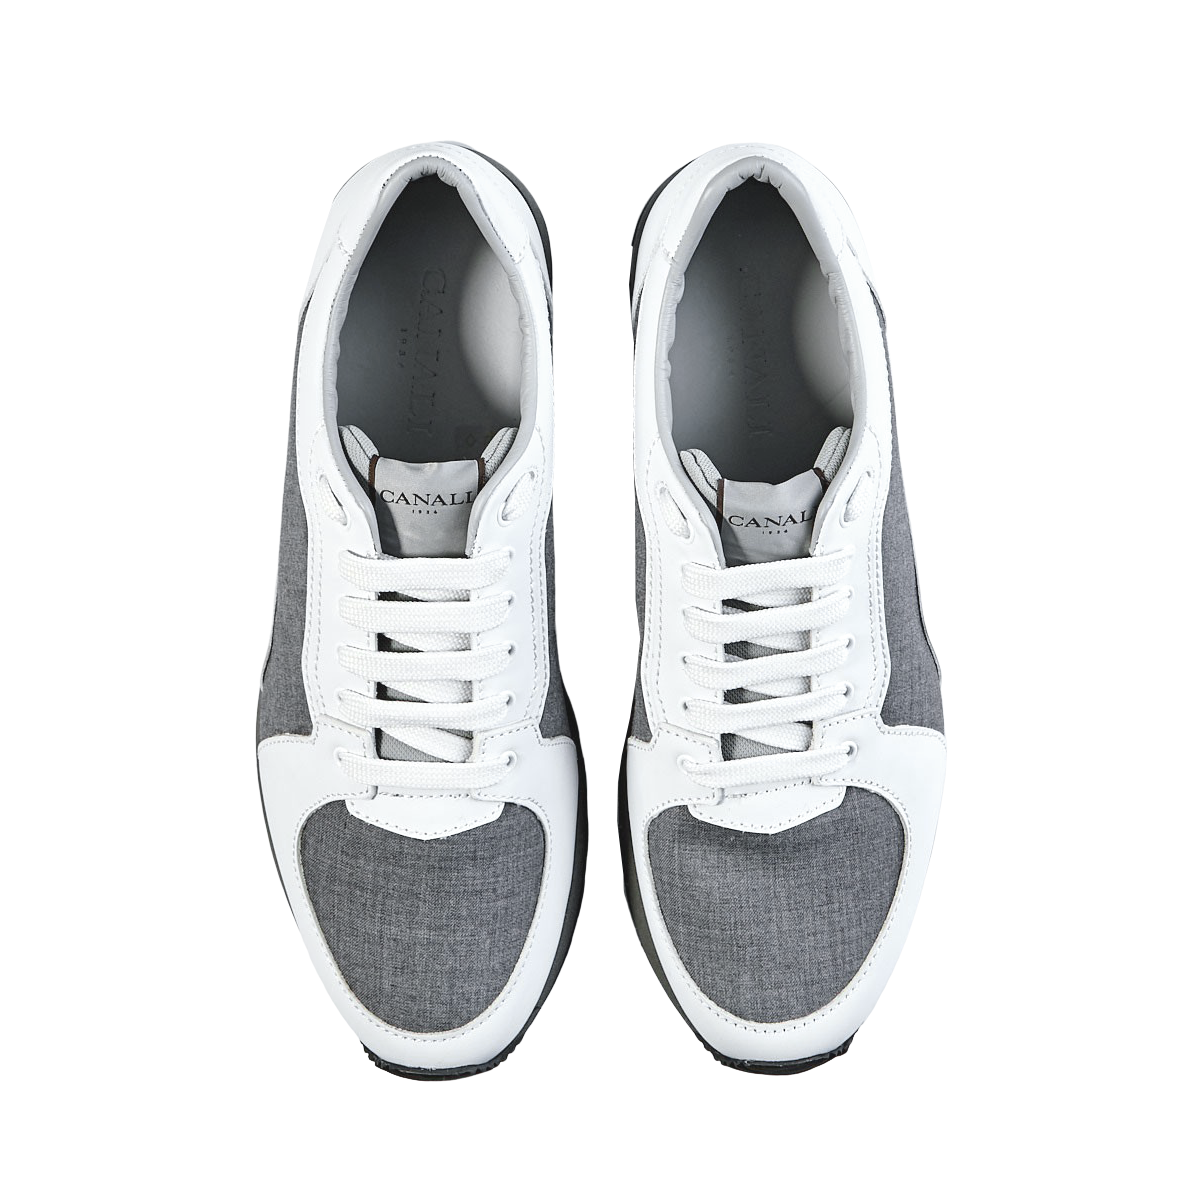 Canali - Grey White Leather Vintage Runner Sneakers | Baltzar